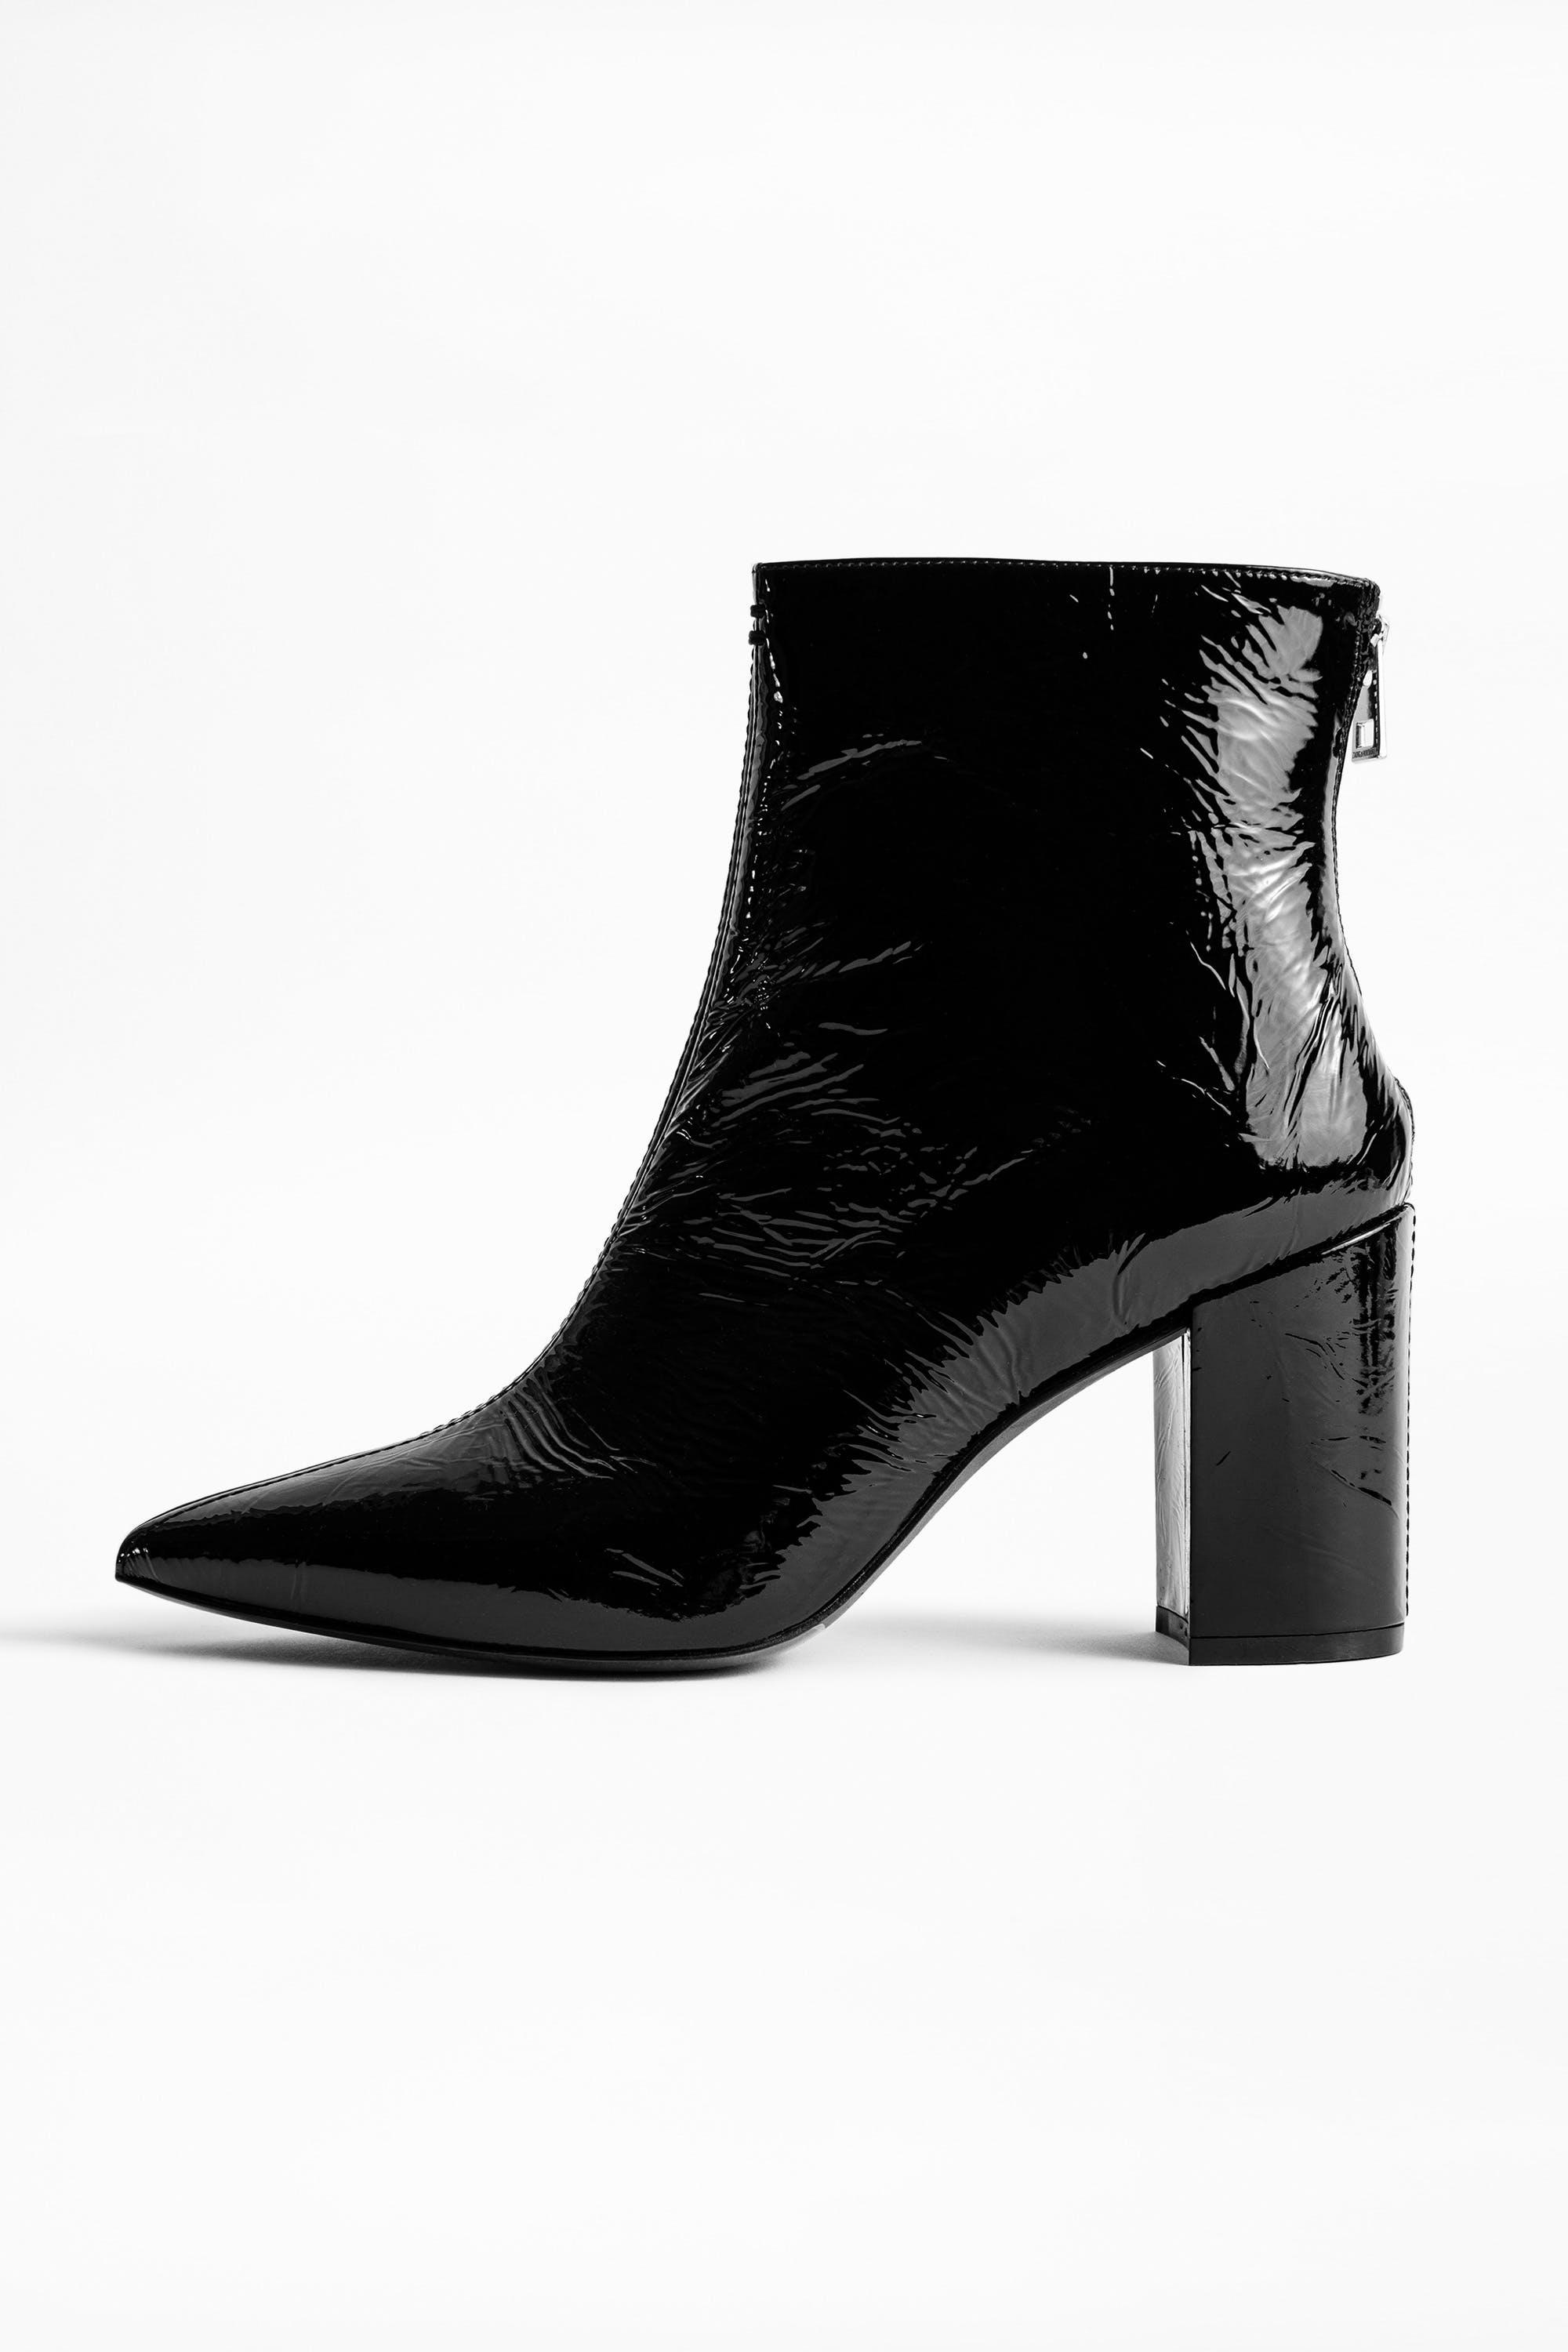 Zadig & Voltaire Leather Glimmer Vernis Ankle Boots in Black - Lyst